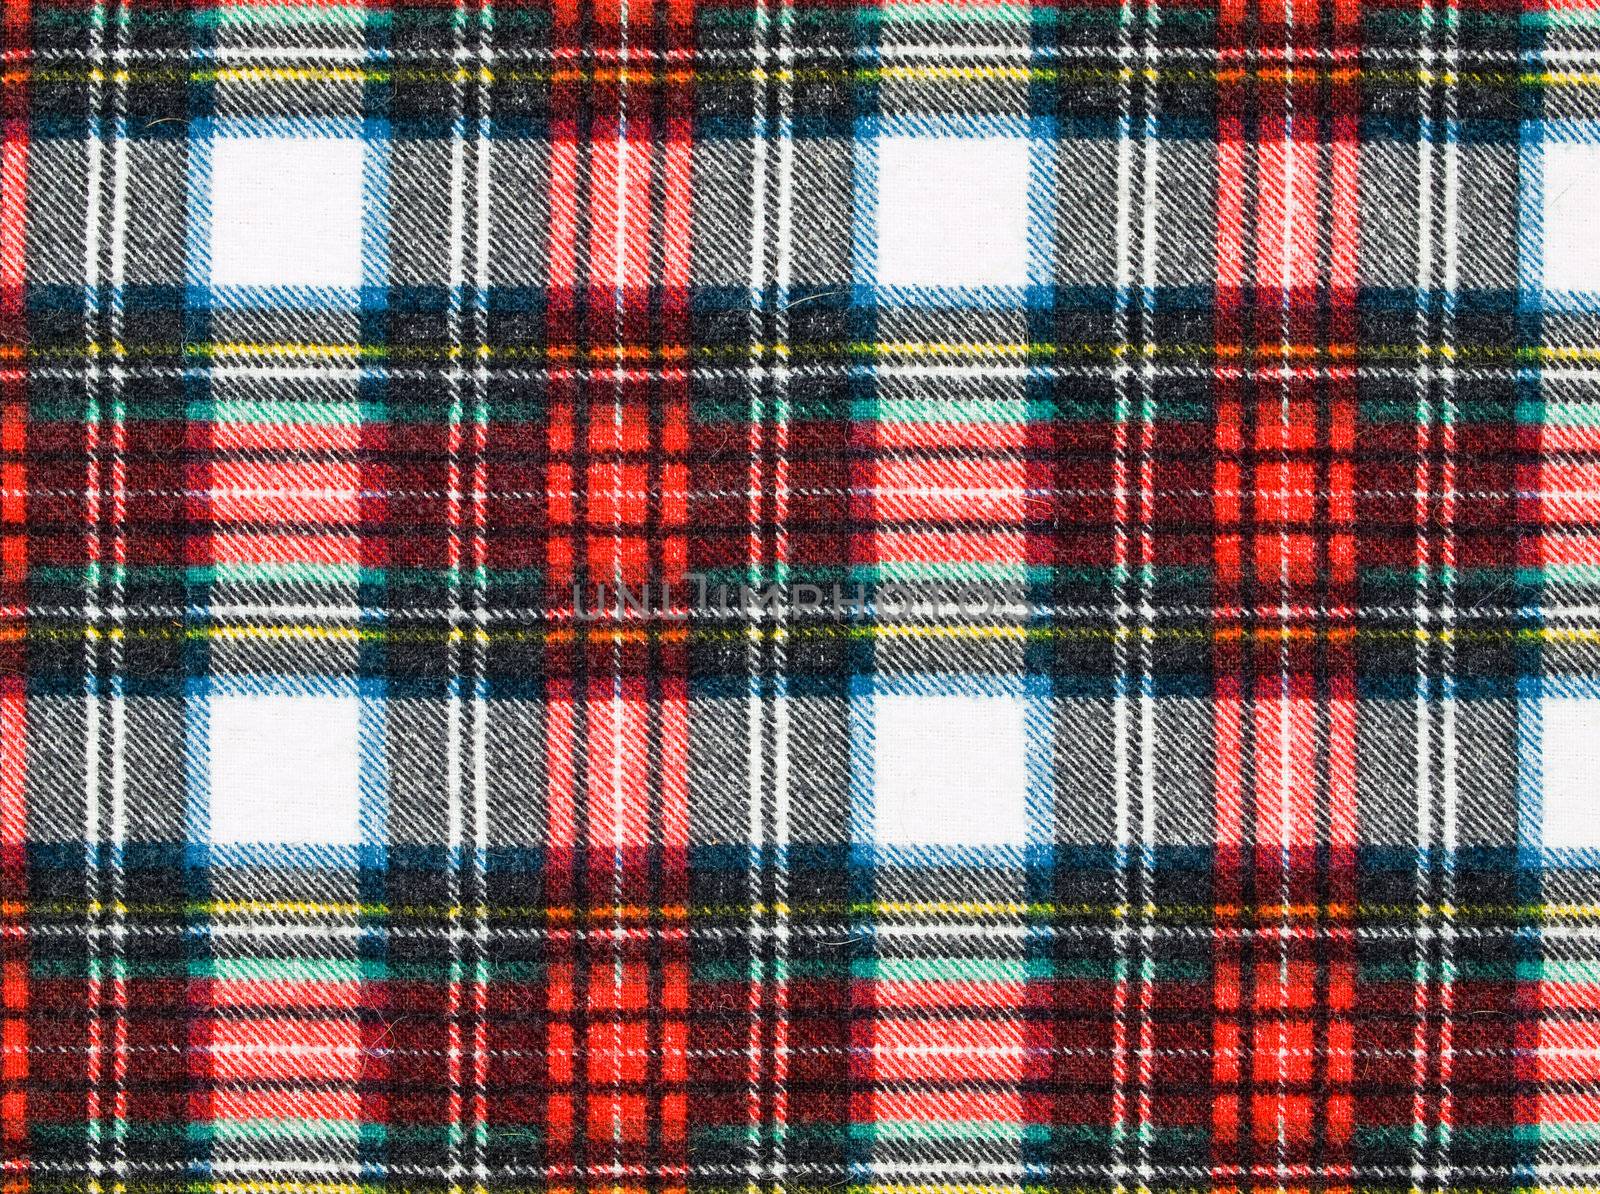 Full Frame Background of Red and Blue Plaid Fabric by Frankljunior